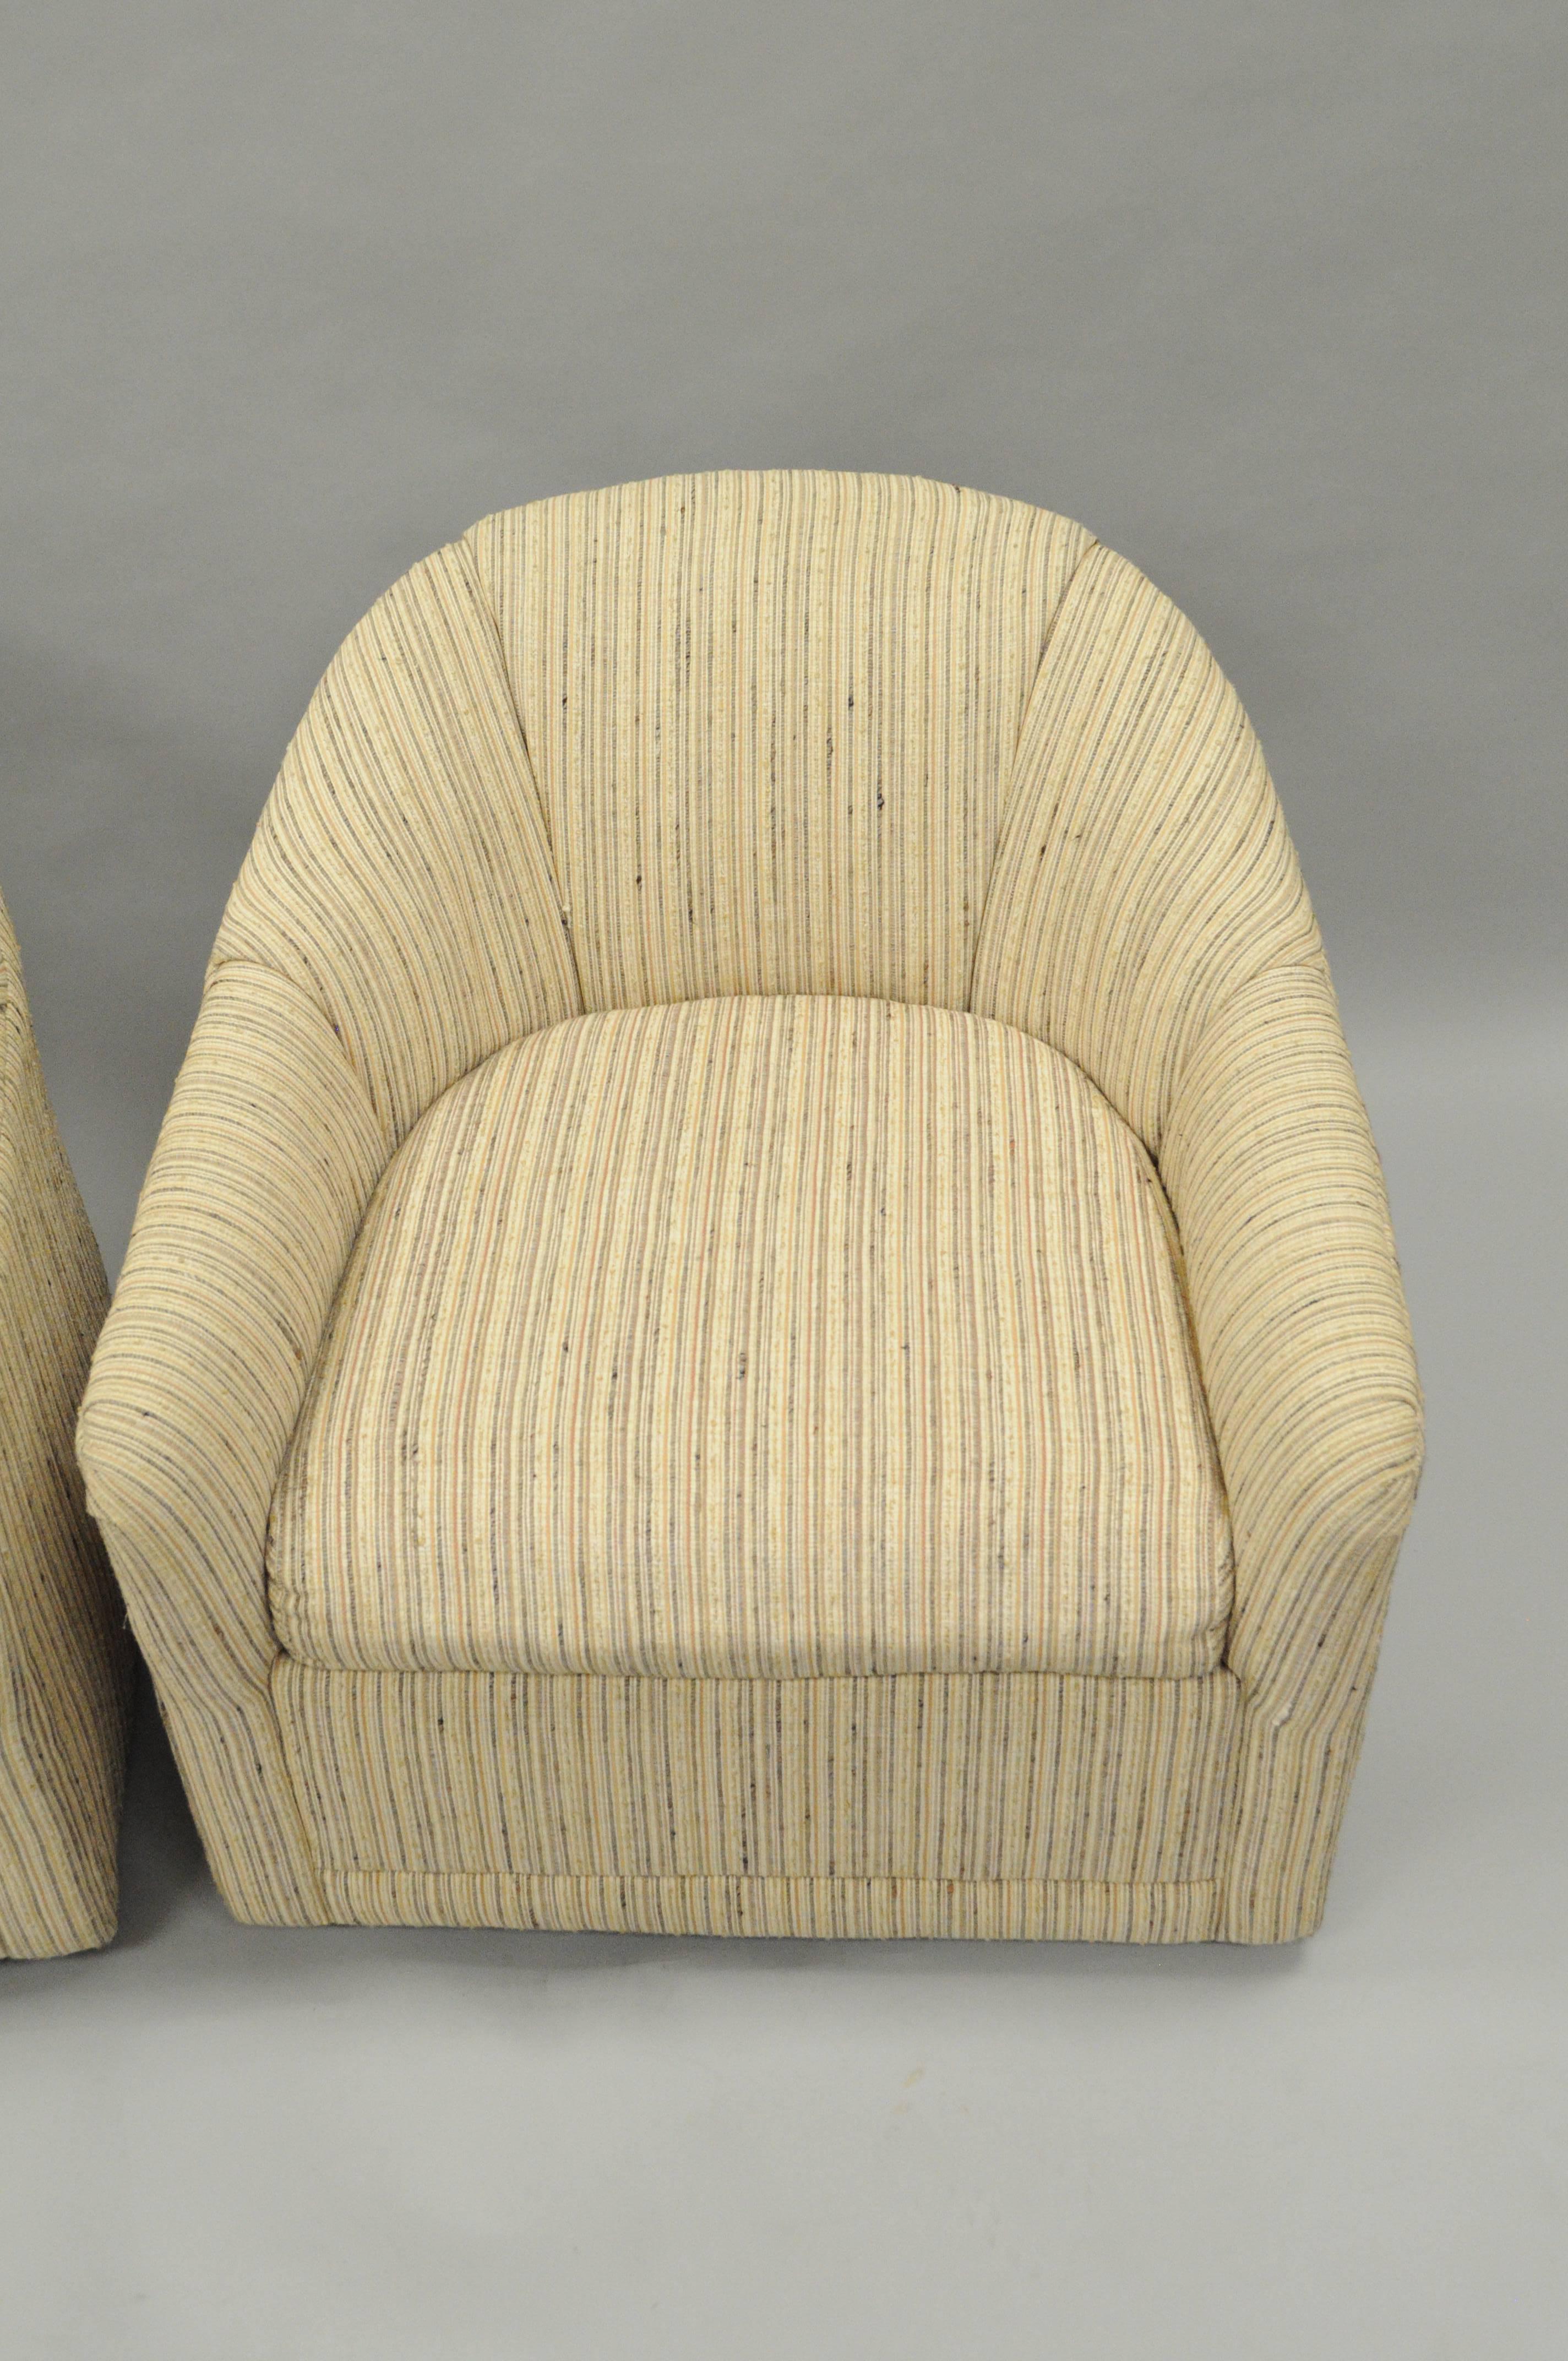 American Pair Selig Mid Century Modern Upholstered Barrel Back Swivel Club Lounge Chairs